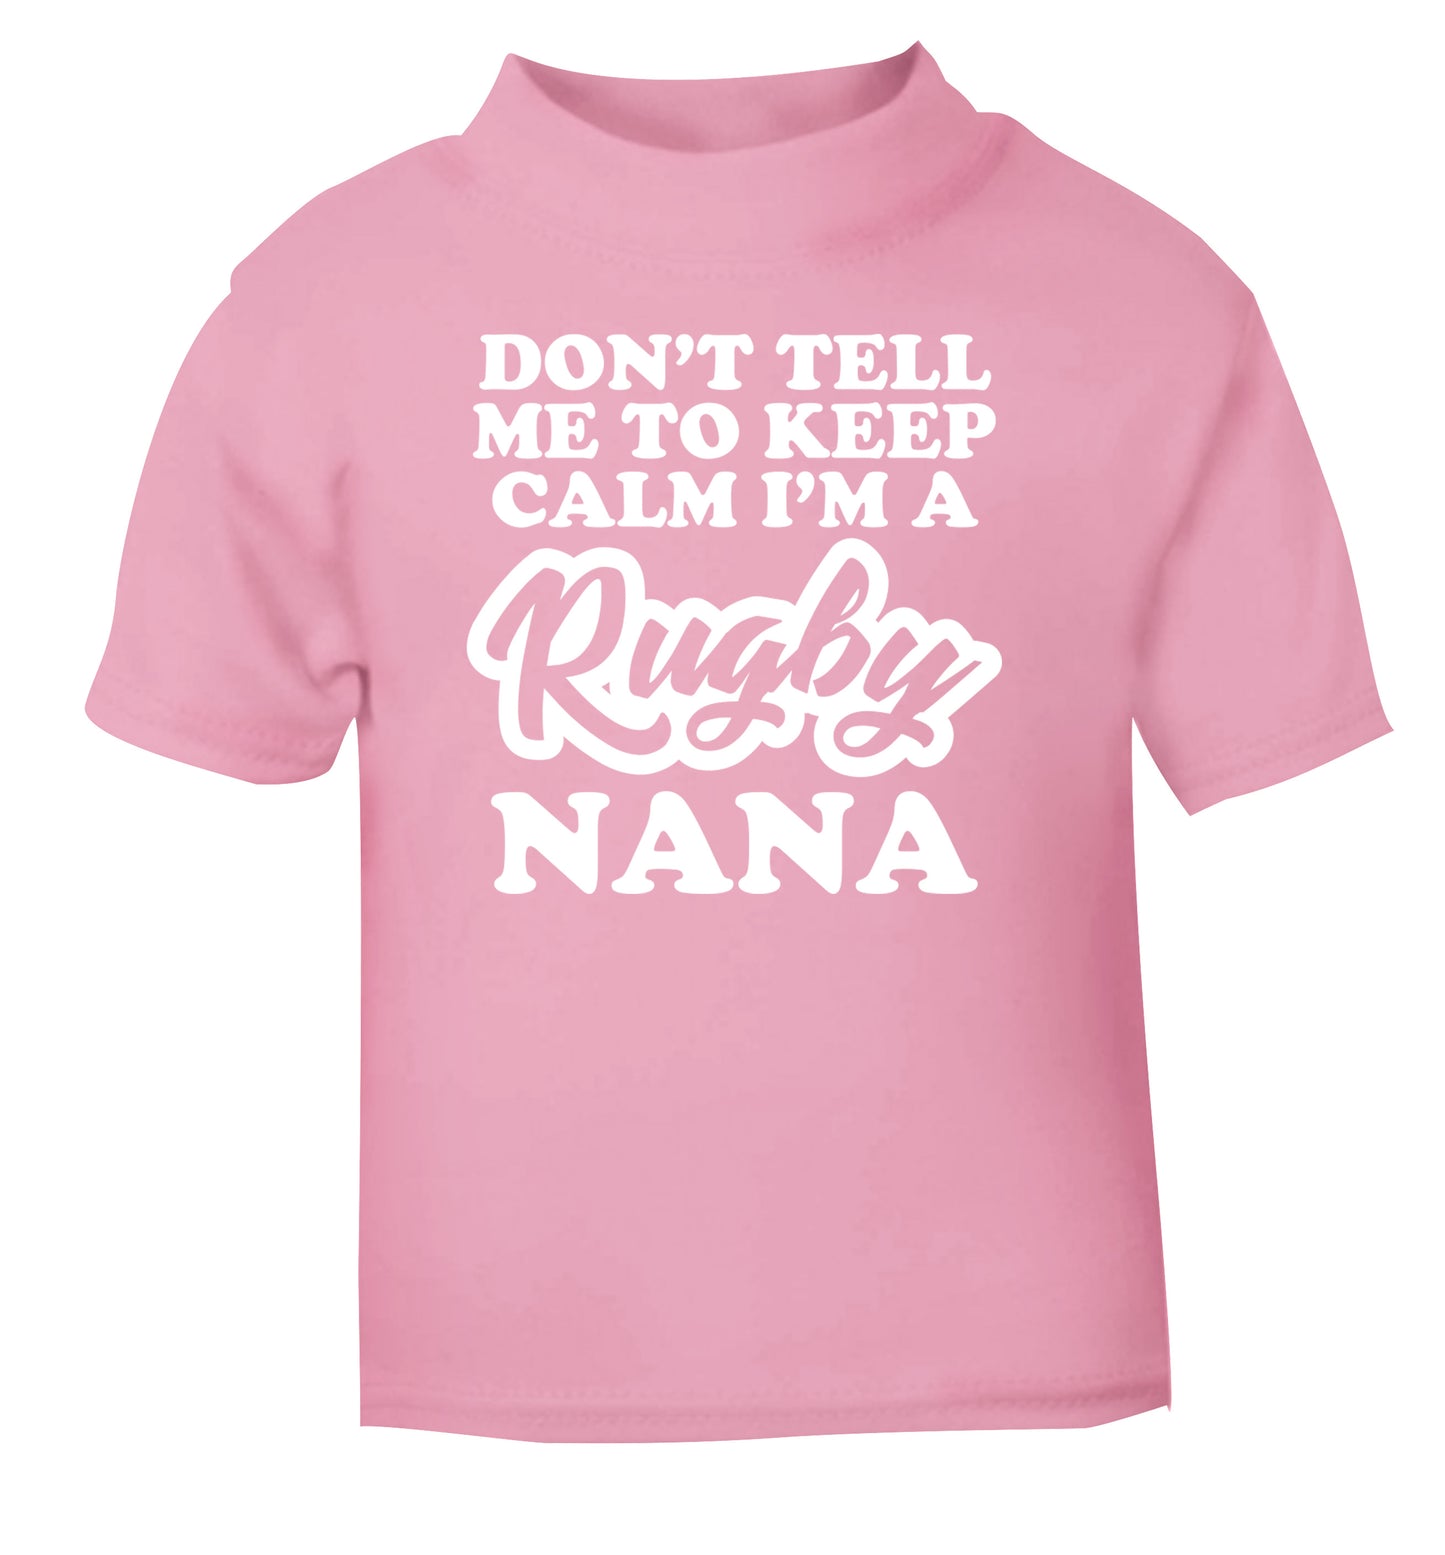 Don't tell me to keep calm I'm a rugby nana light pink Baby Toddler Tshirt 2 Years